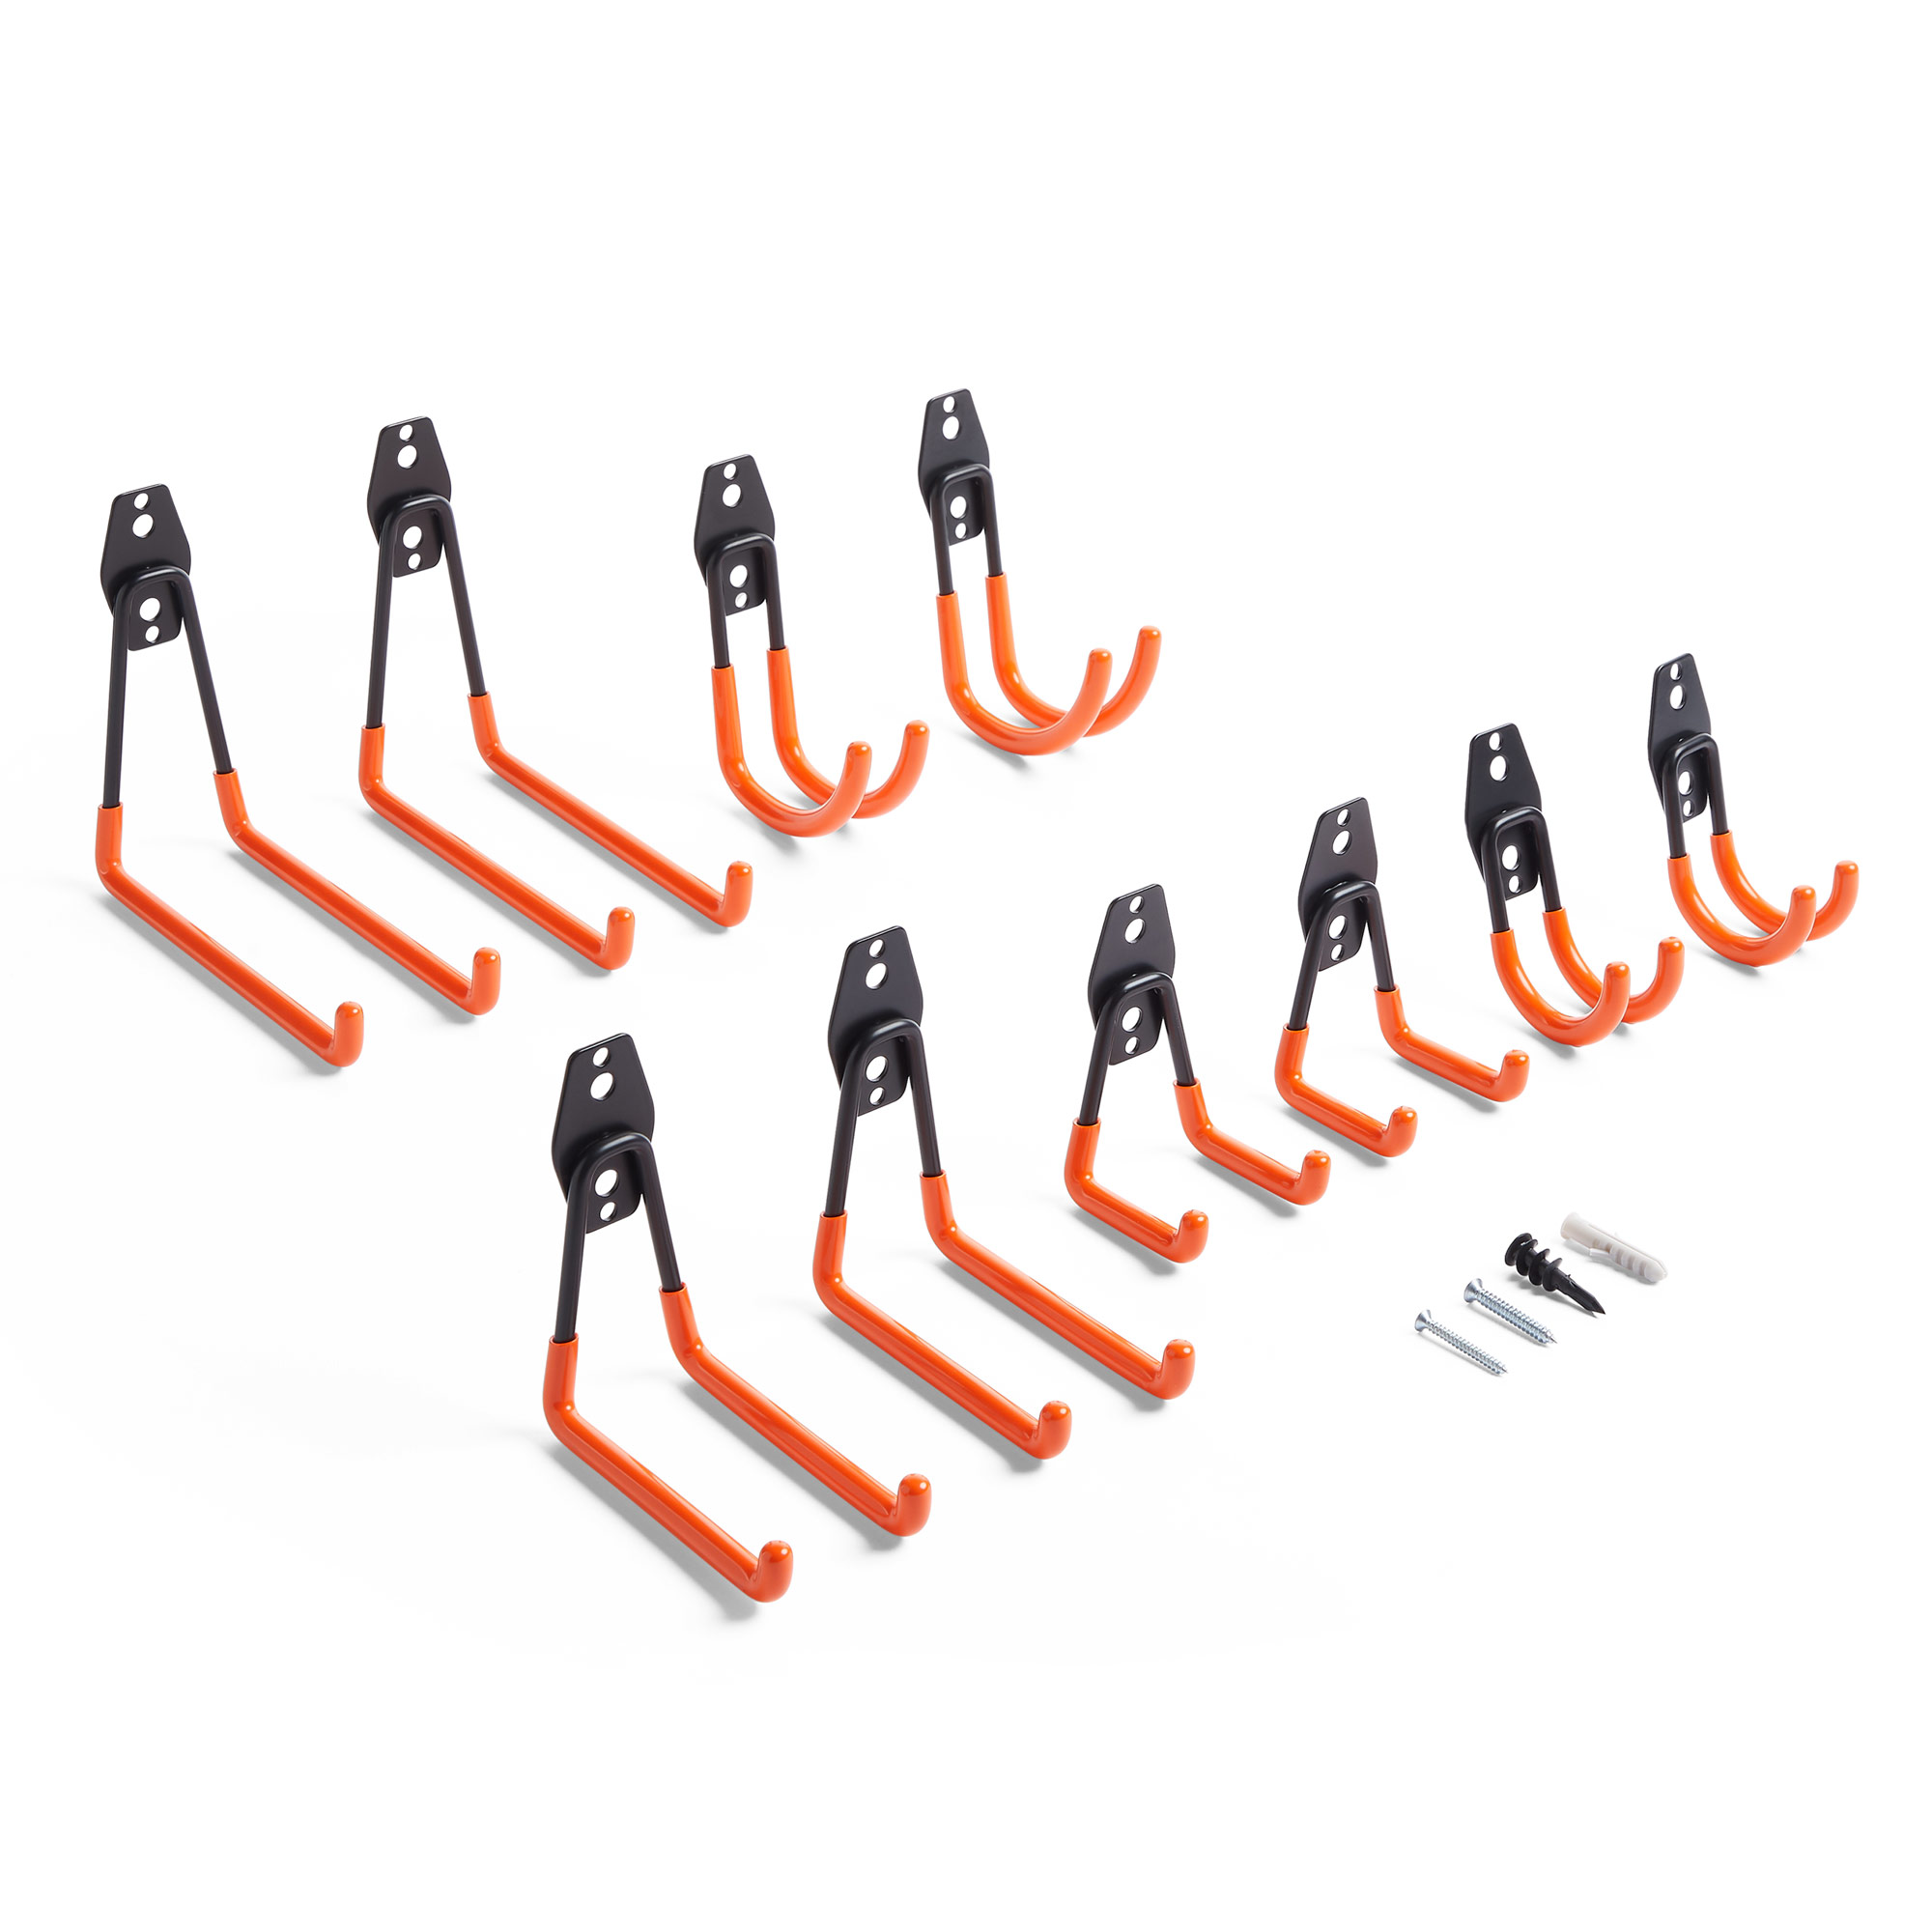 Garage Hooks Wall Mount Tool Storage Hangers Suitable for Sheds & More - VonHaus